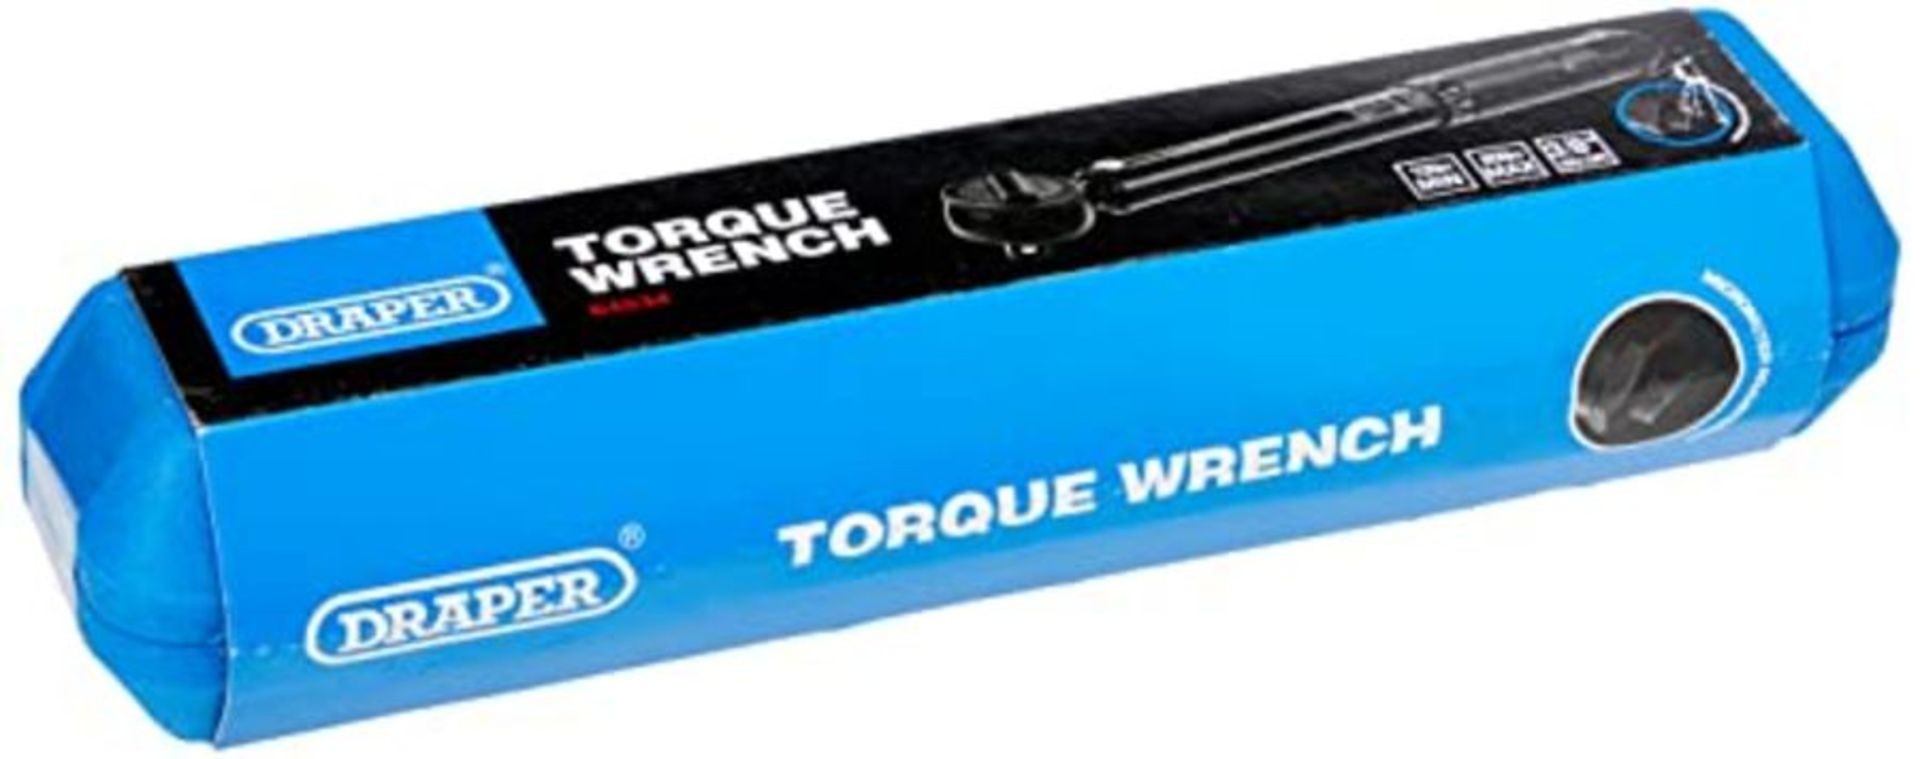 Draper 64534 Square Drive Ratchet Torque Wrench 3/8 Inch , Blue